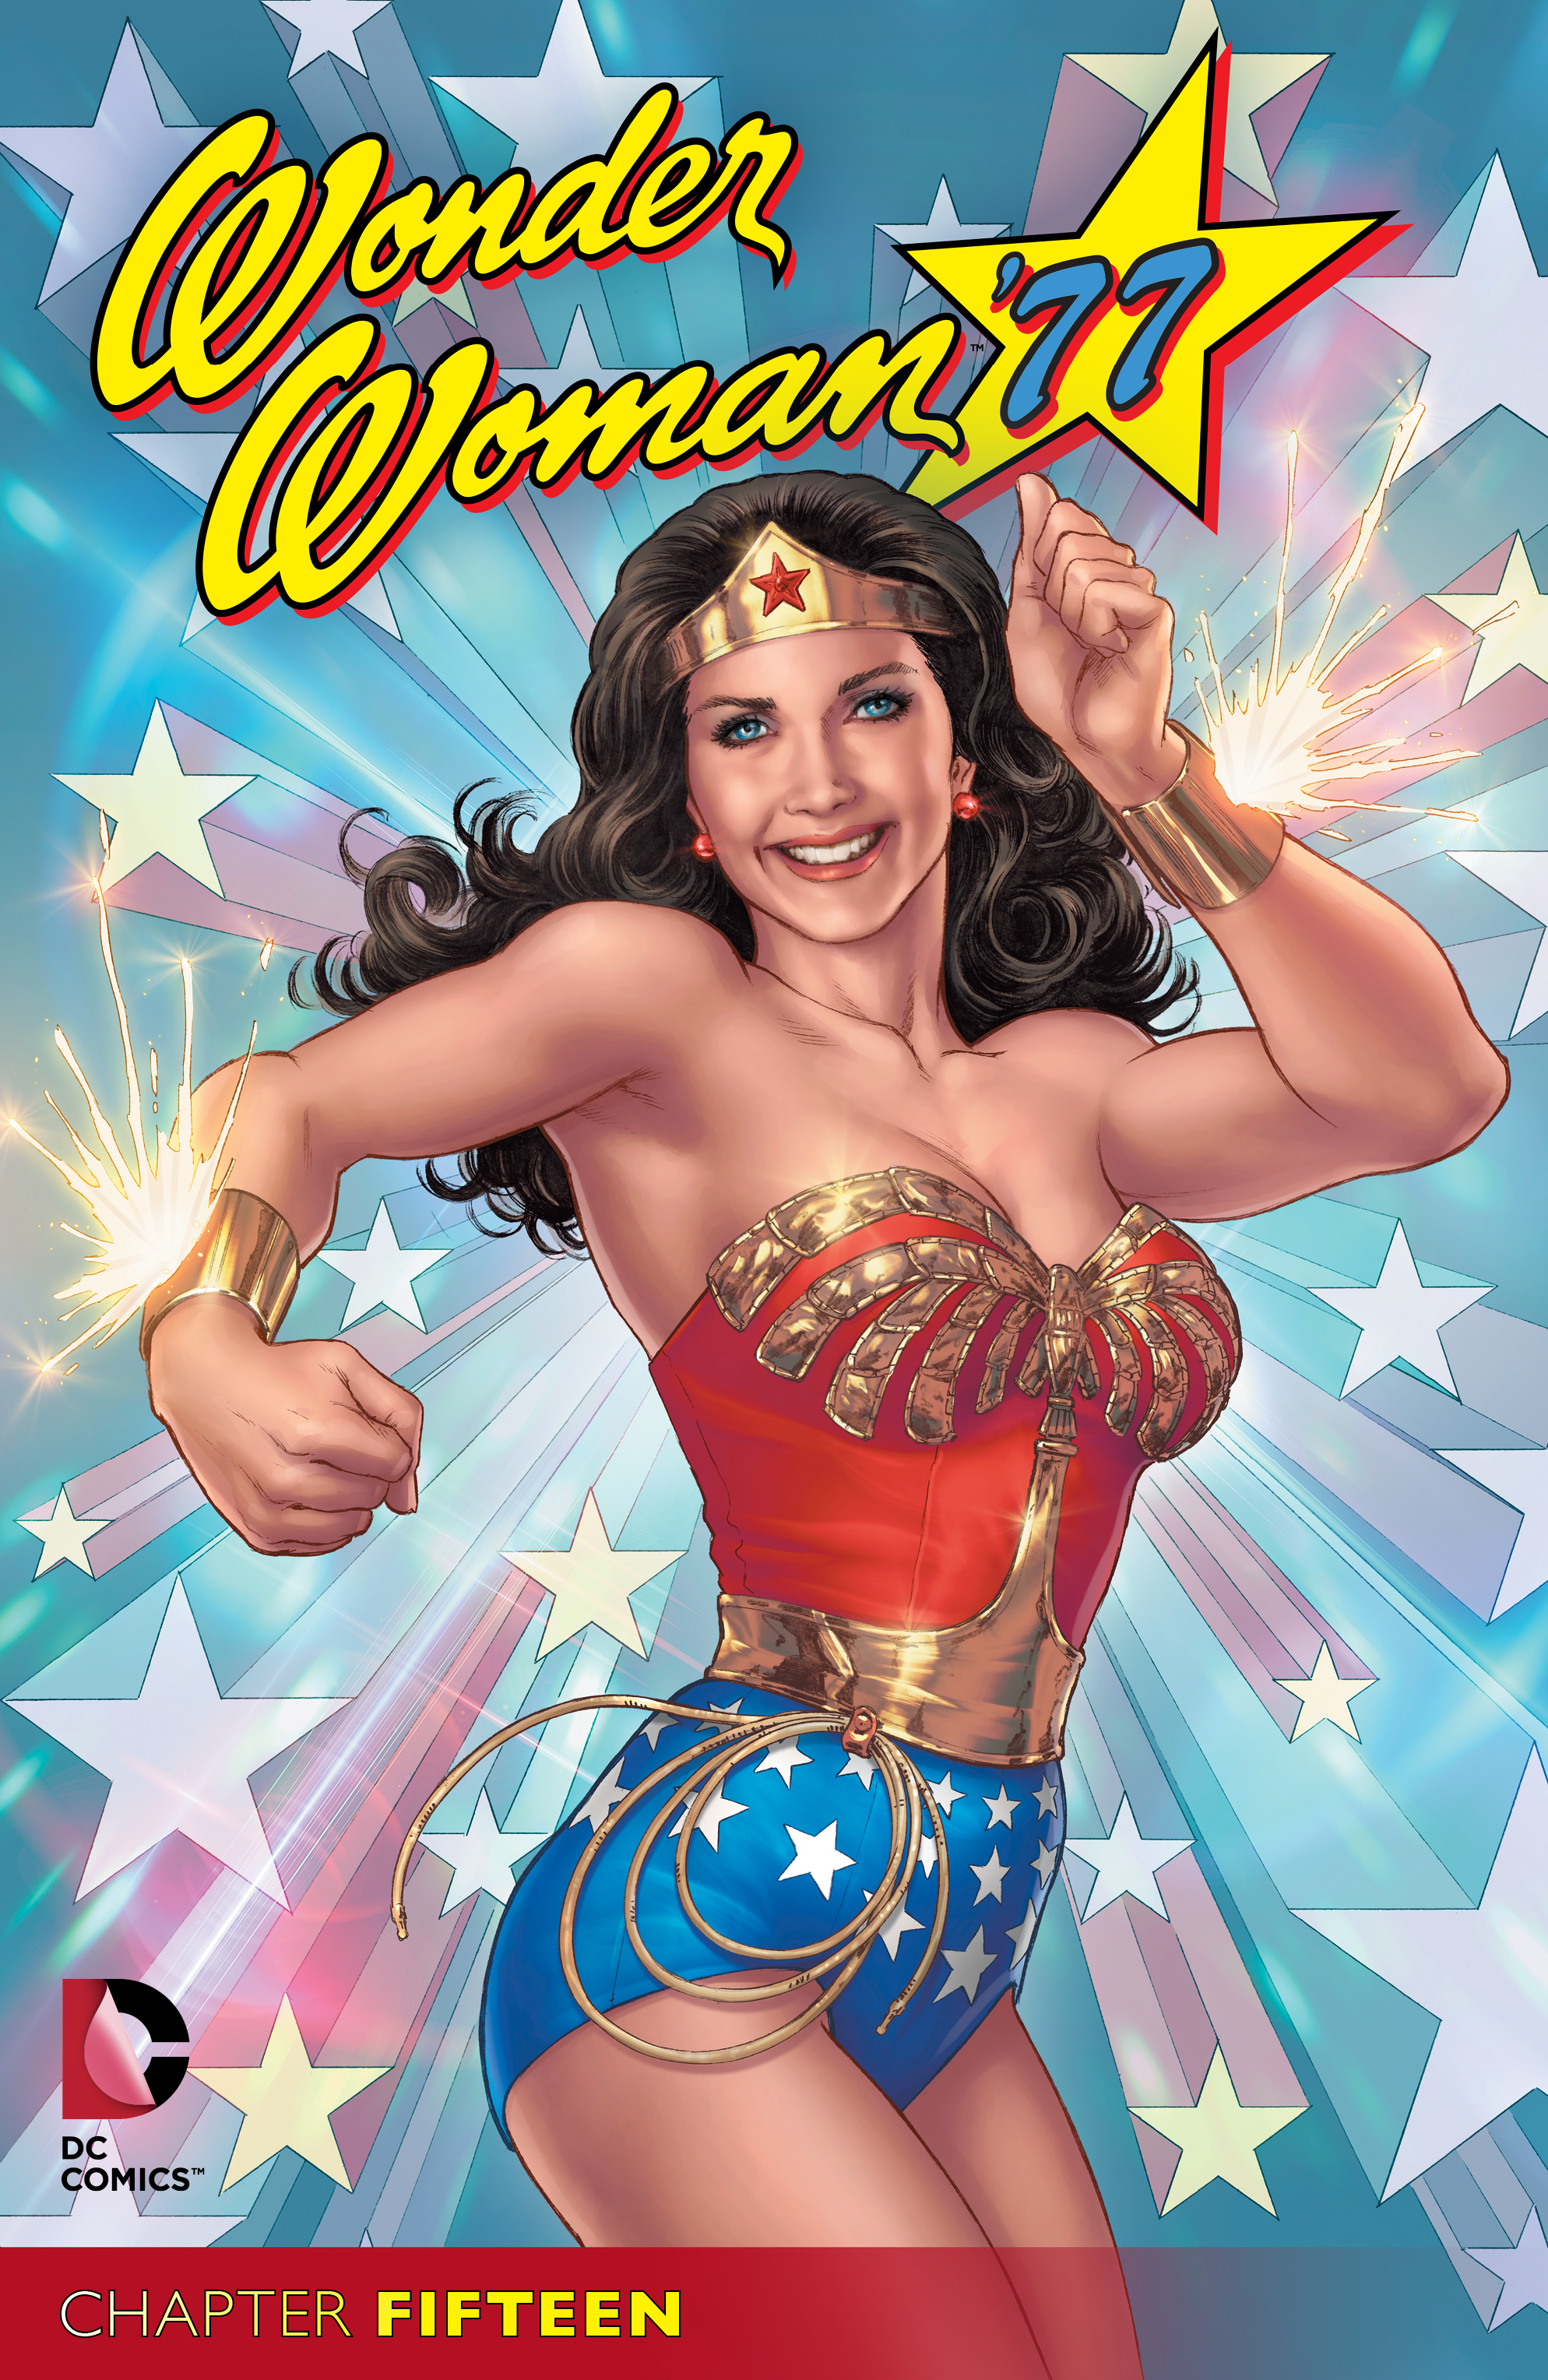 Wonder Woman '77 #15 preview images